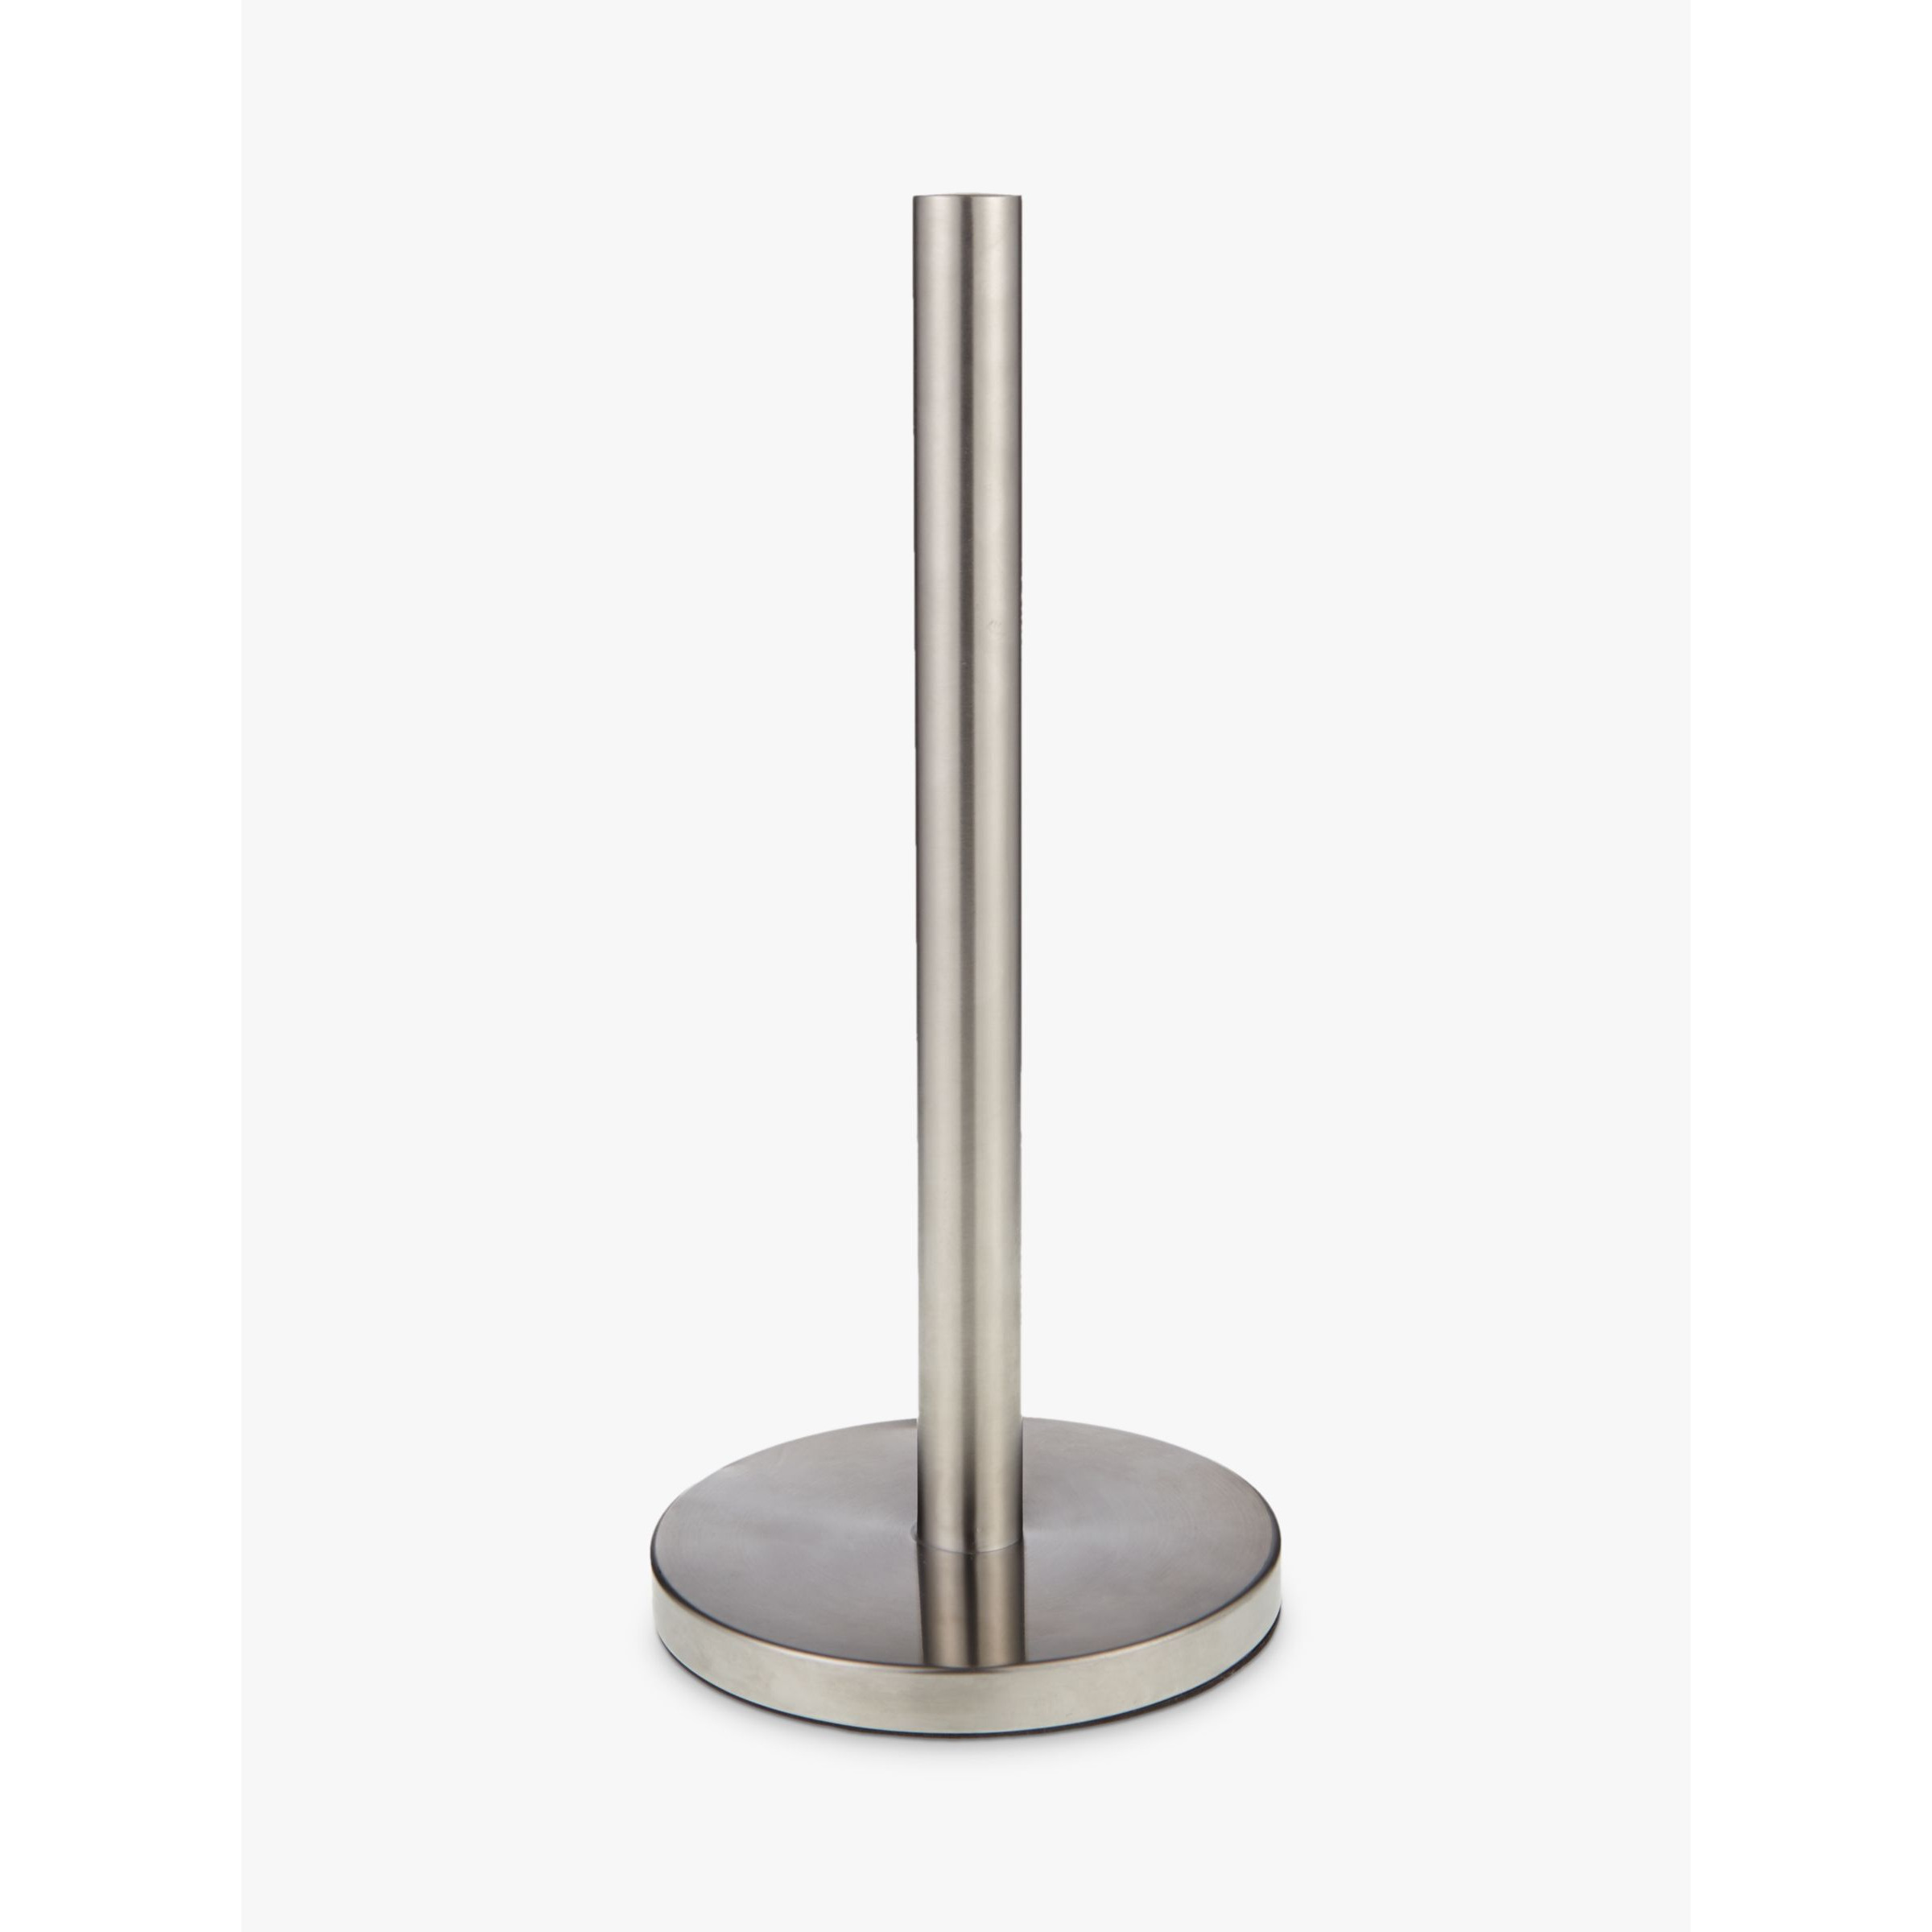 John Lewis ANYDAY Toilet Roll Holder - image 1